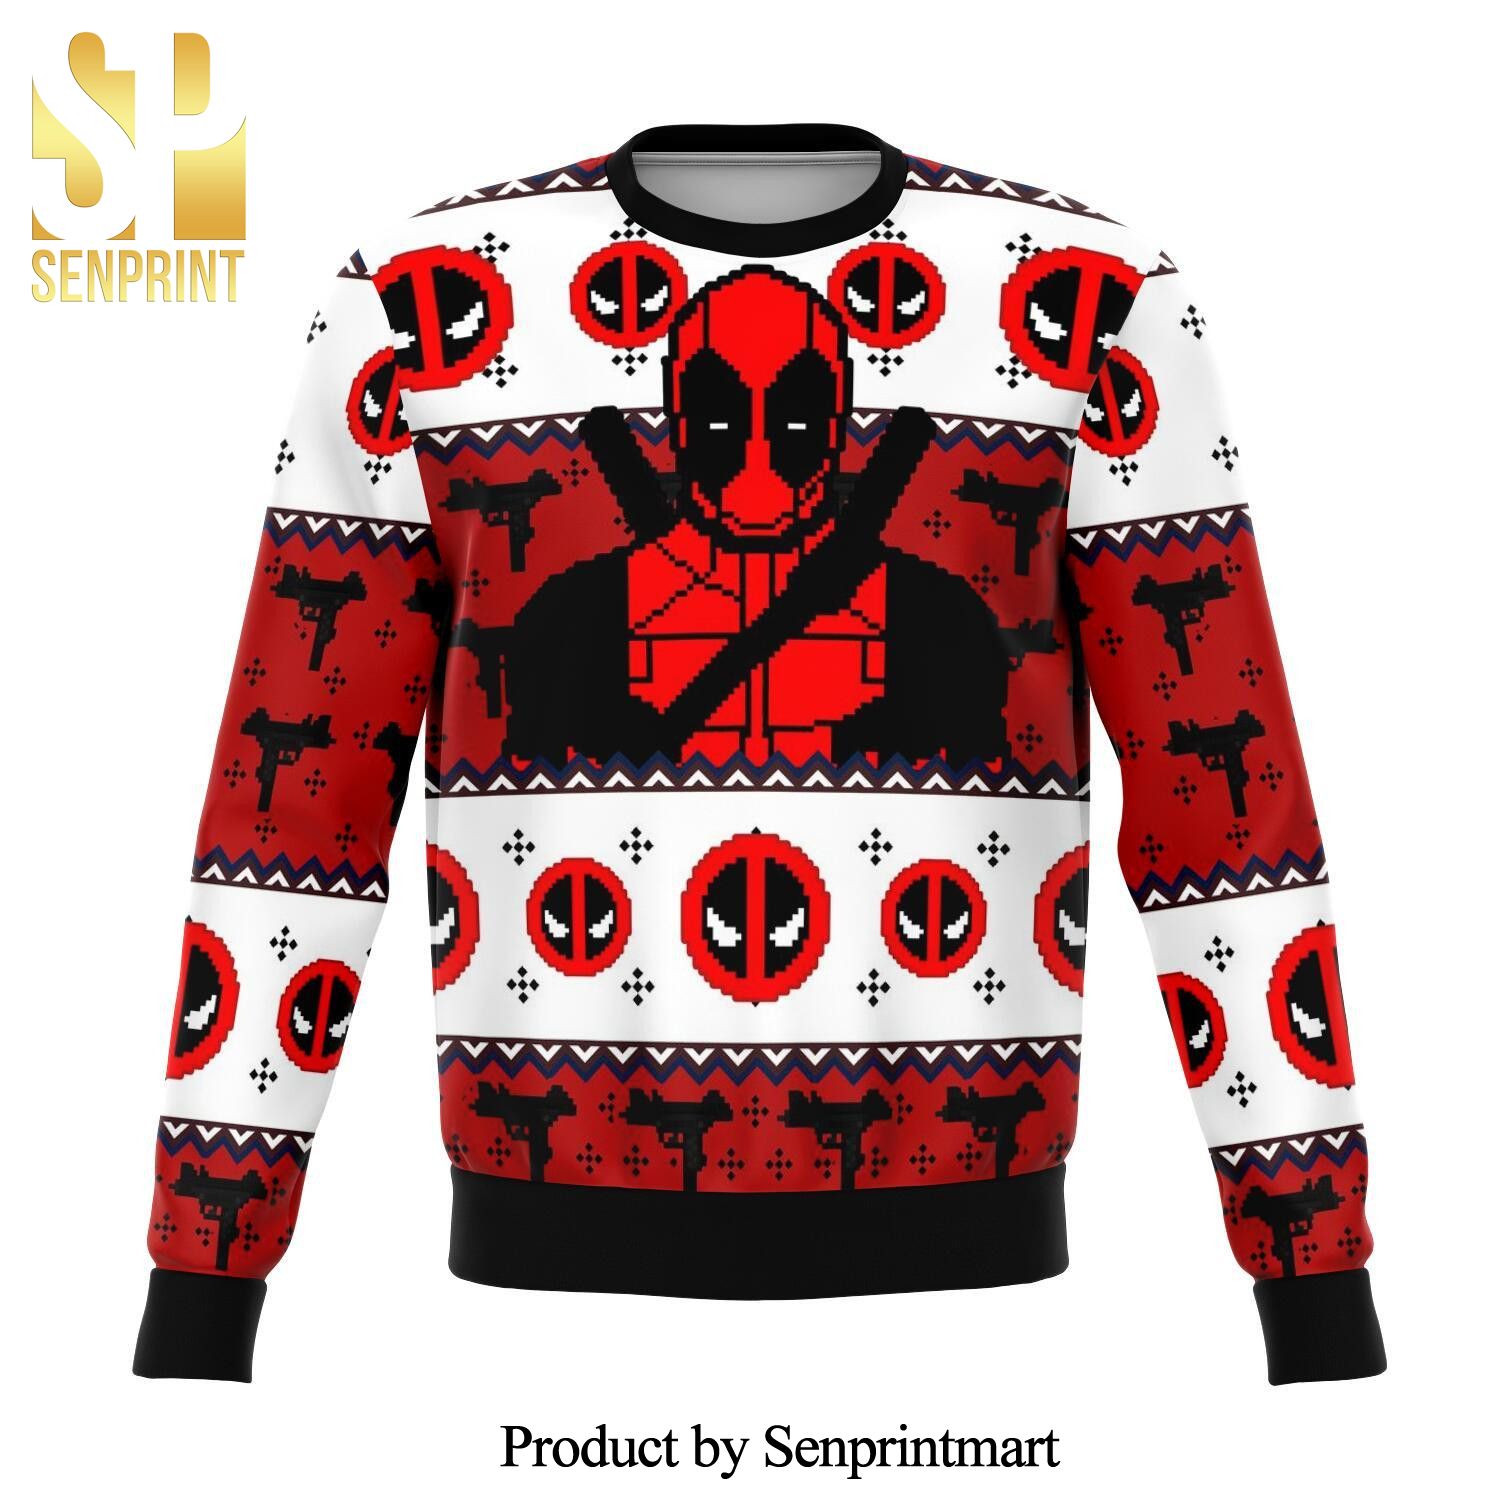 Deadpool Guy Face Mask Premium Knitted Ugly Christmas Sweater